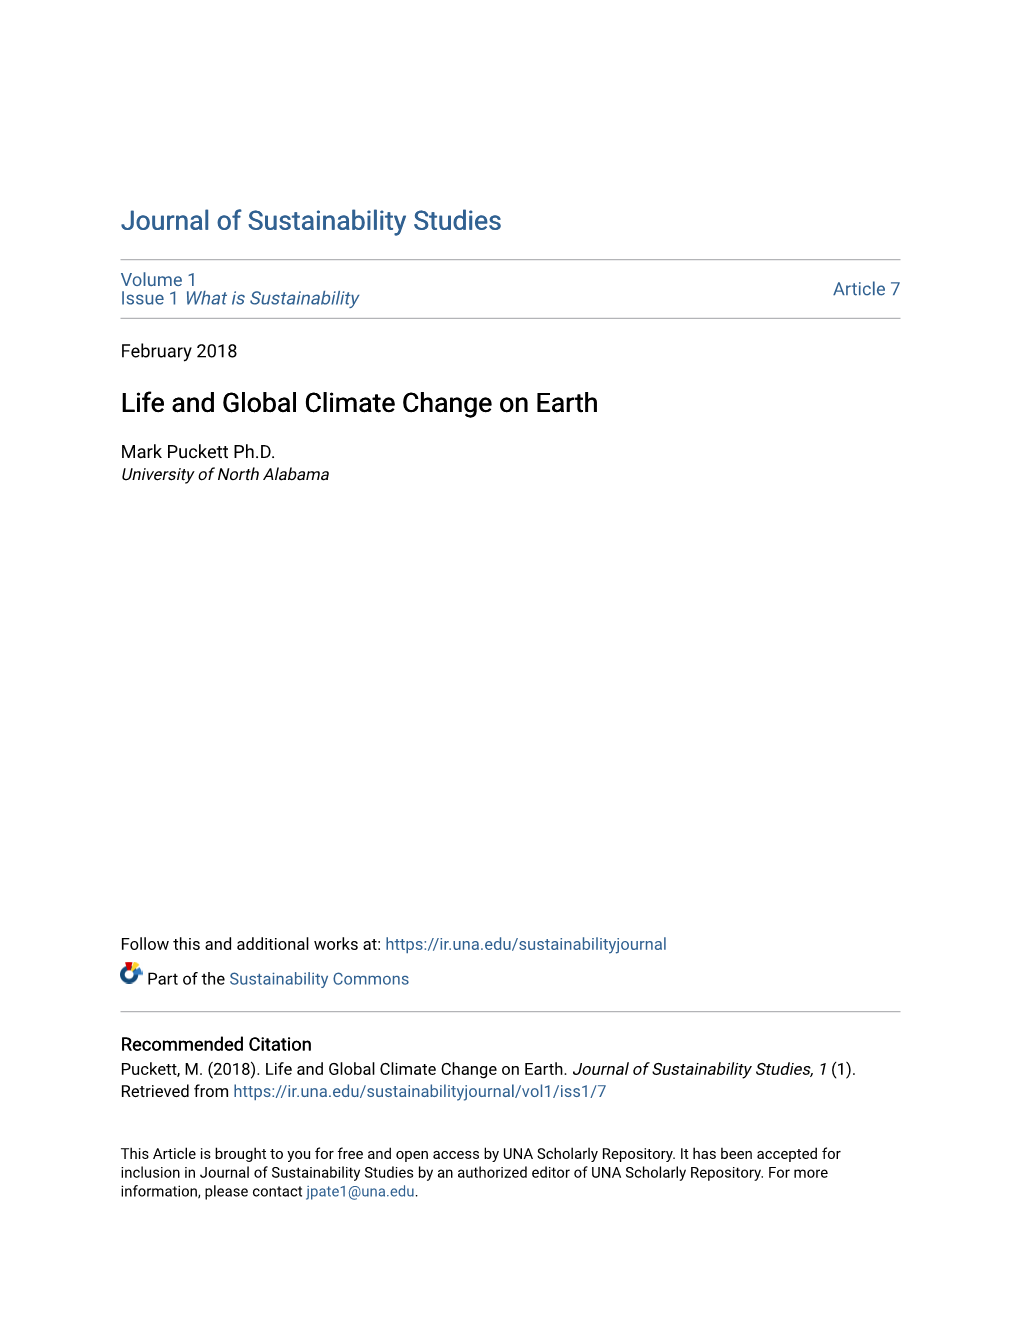 Life and Global Climate Change on Earth